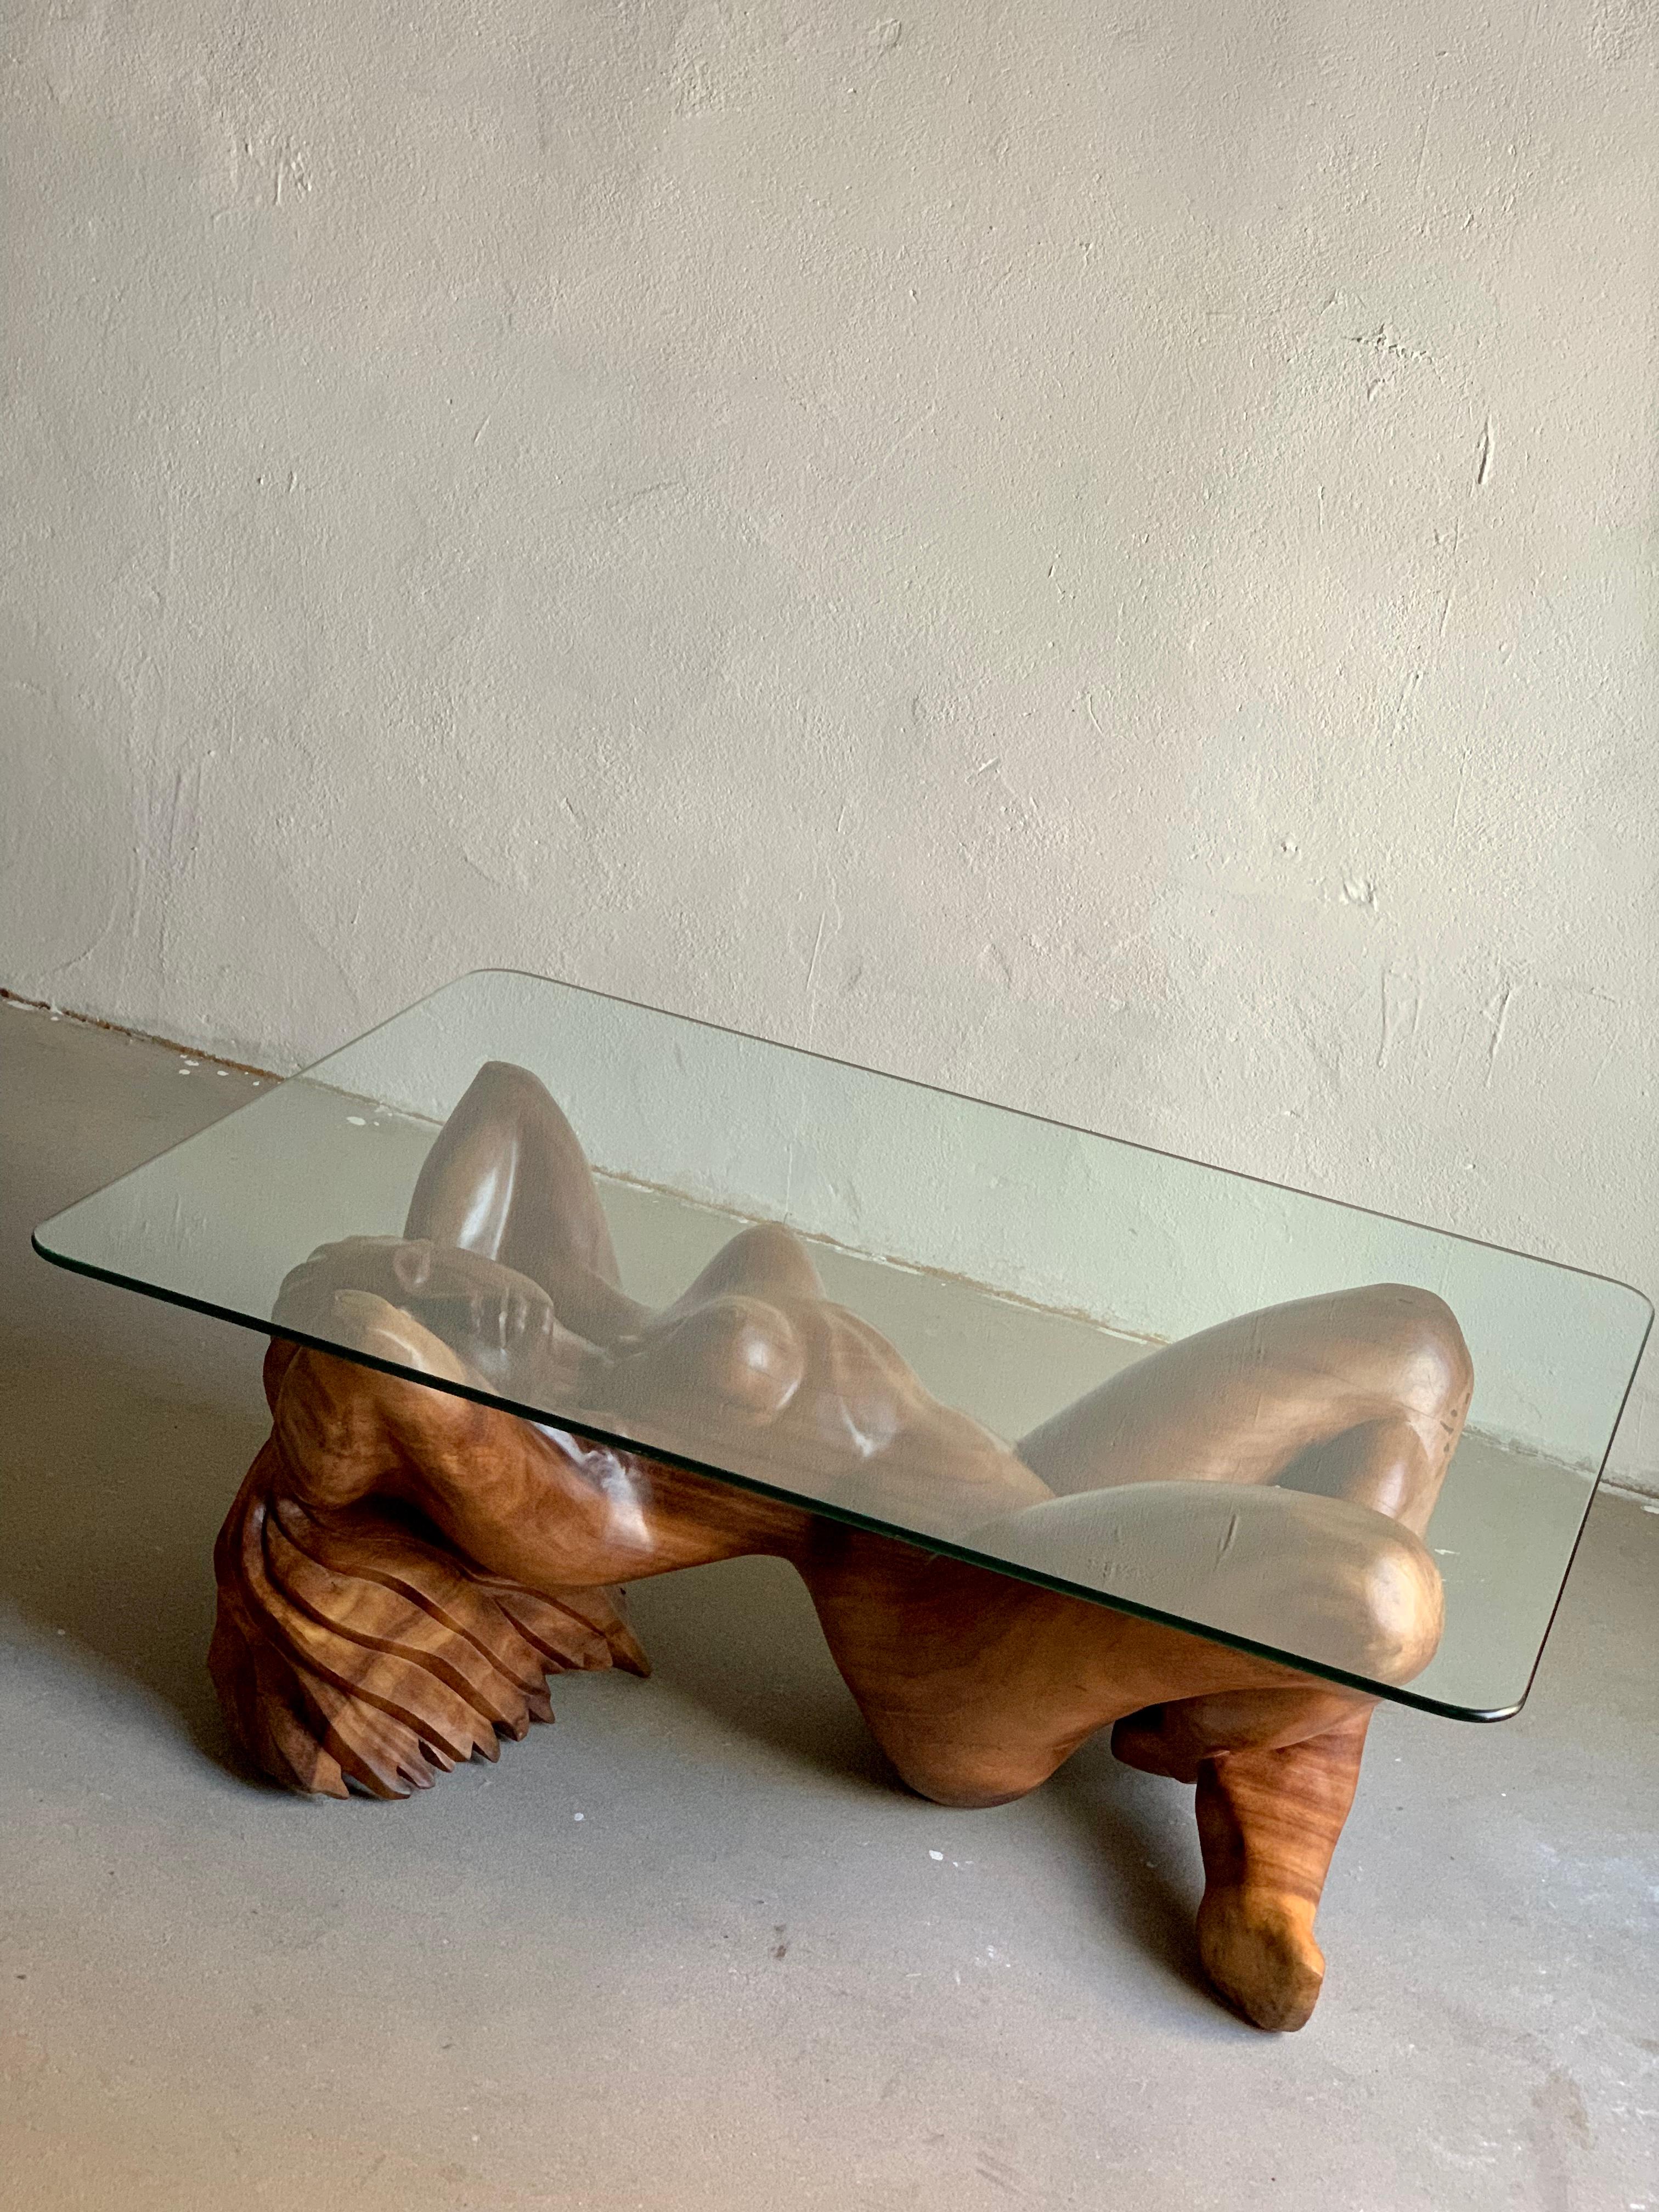 Vintage Hand-Carved Wooden Female Nude Sculpture Coffee Table Base For Sale 1